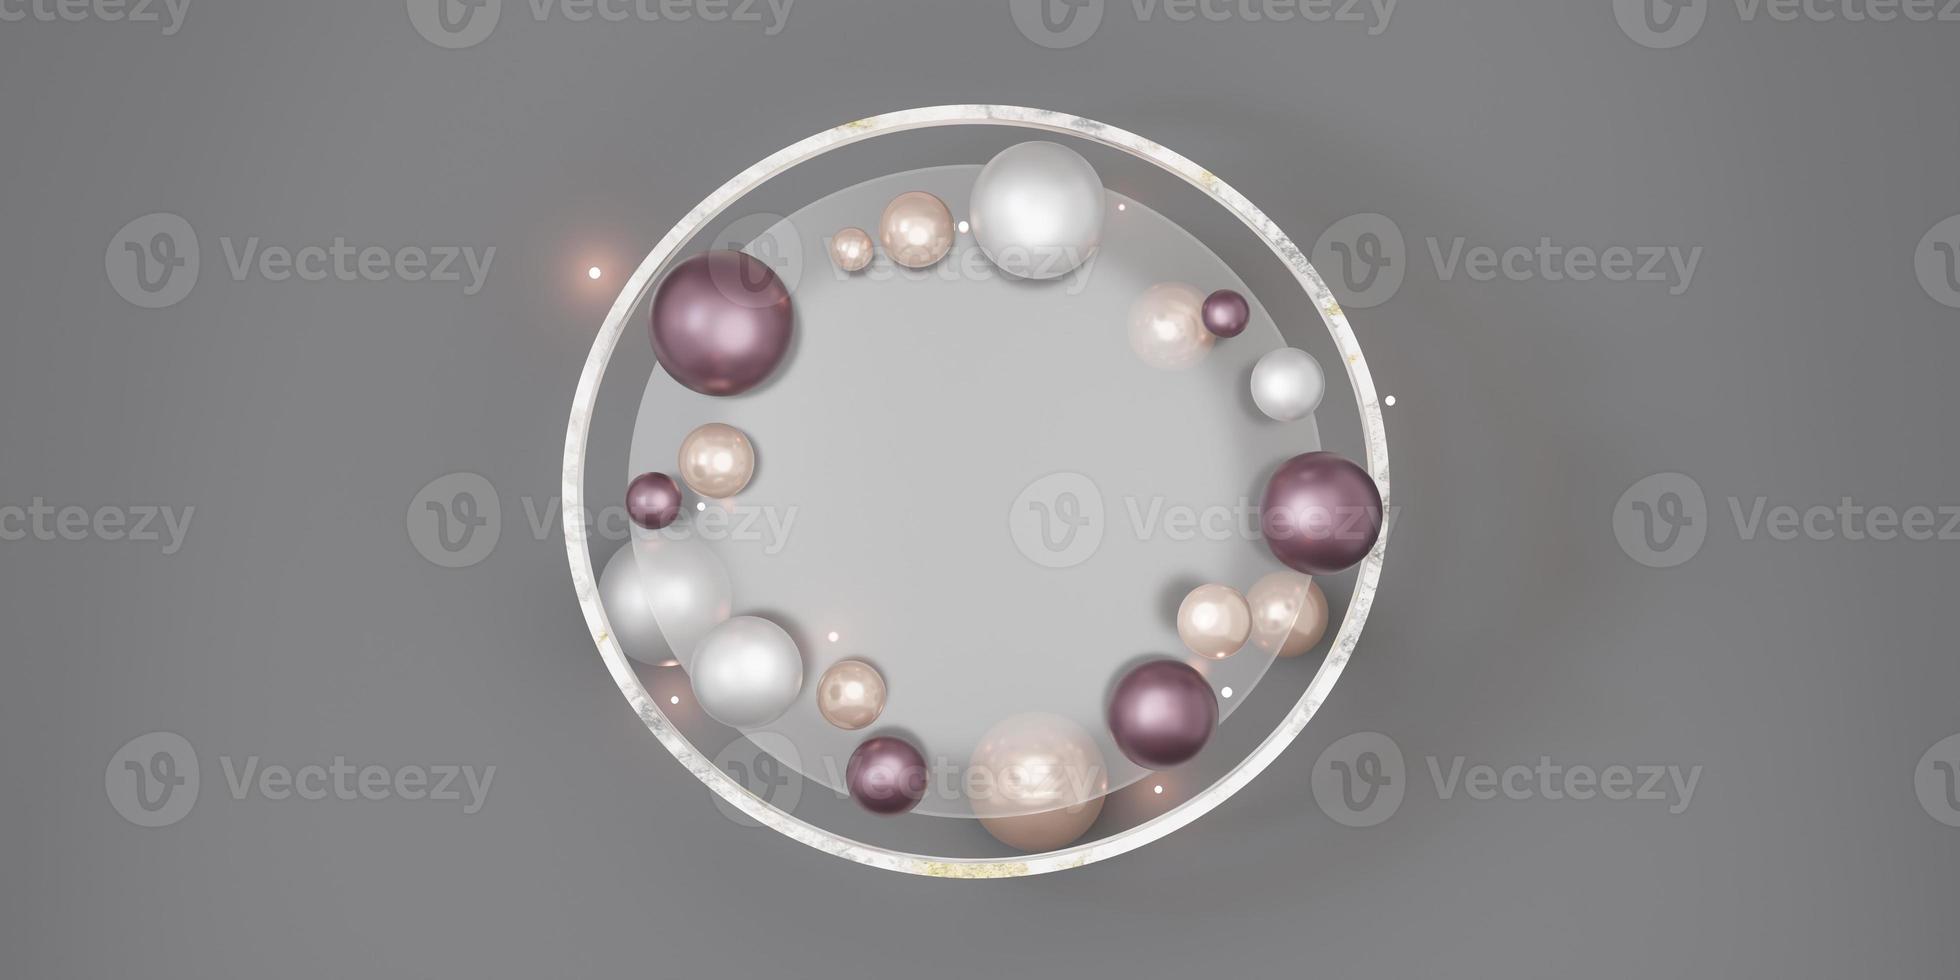 glass frames for text and pictures With beads and pearls 3d illustration modern decorative background photo